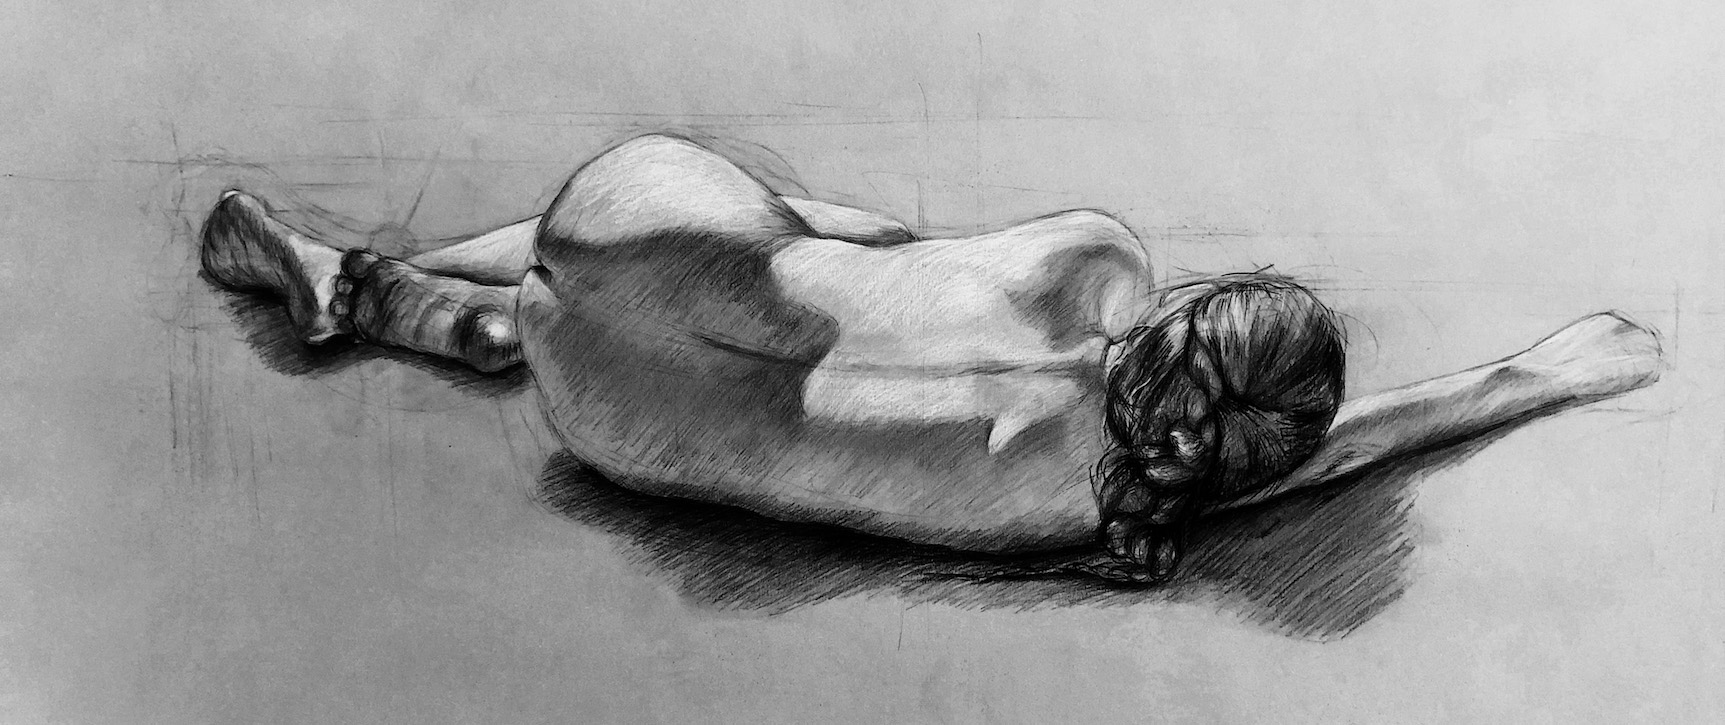 life drawing in charcoal of a woman lying on her side, by Hannah Kim